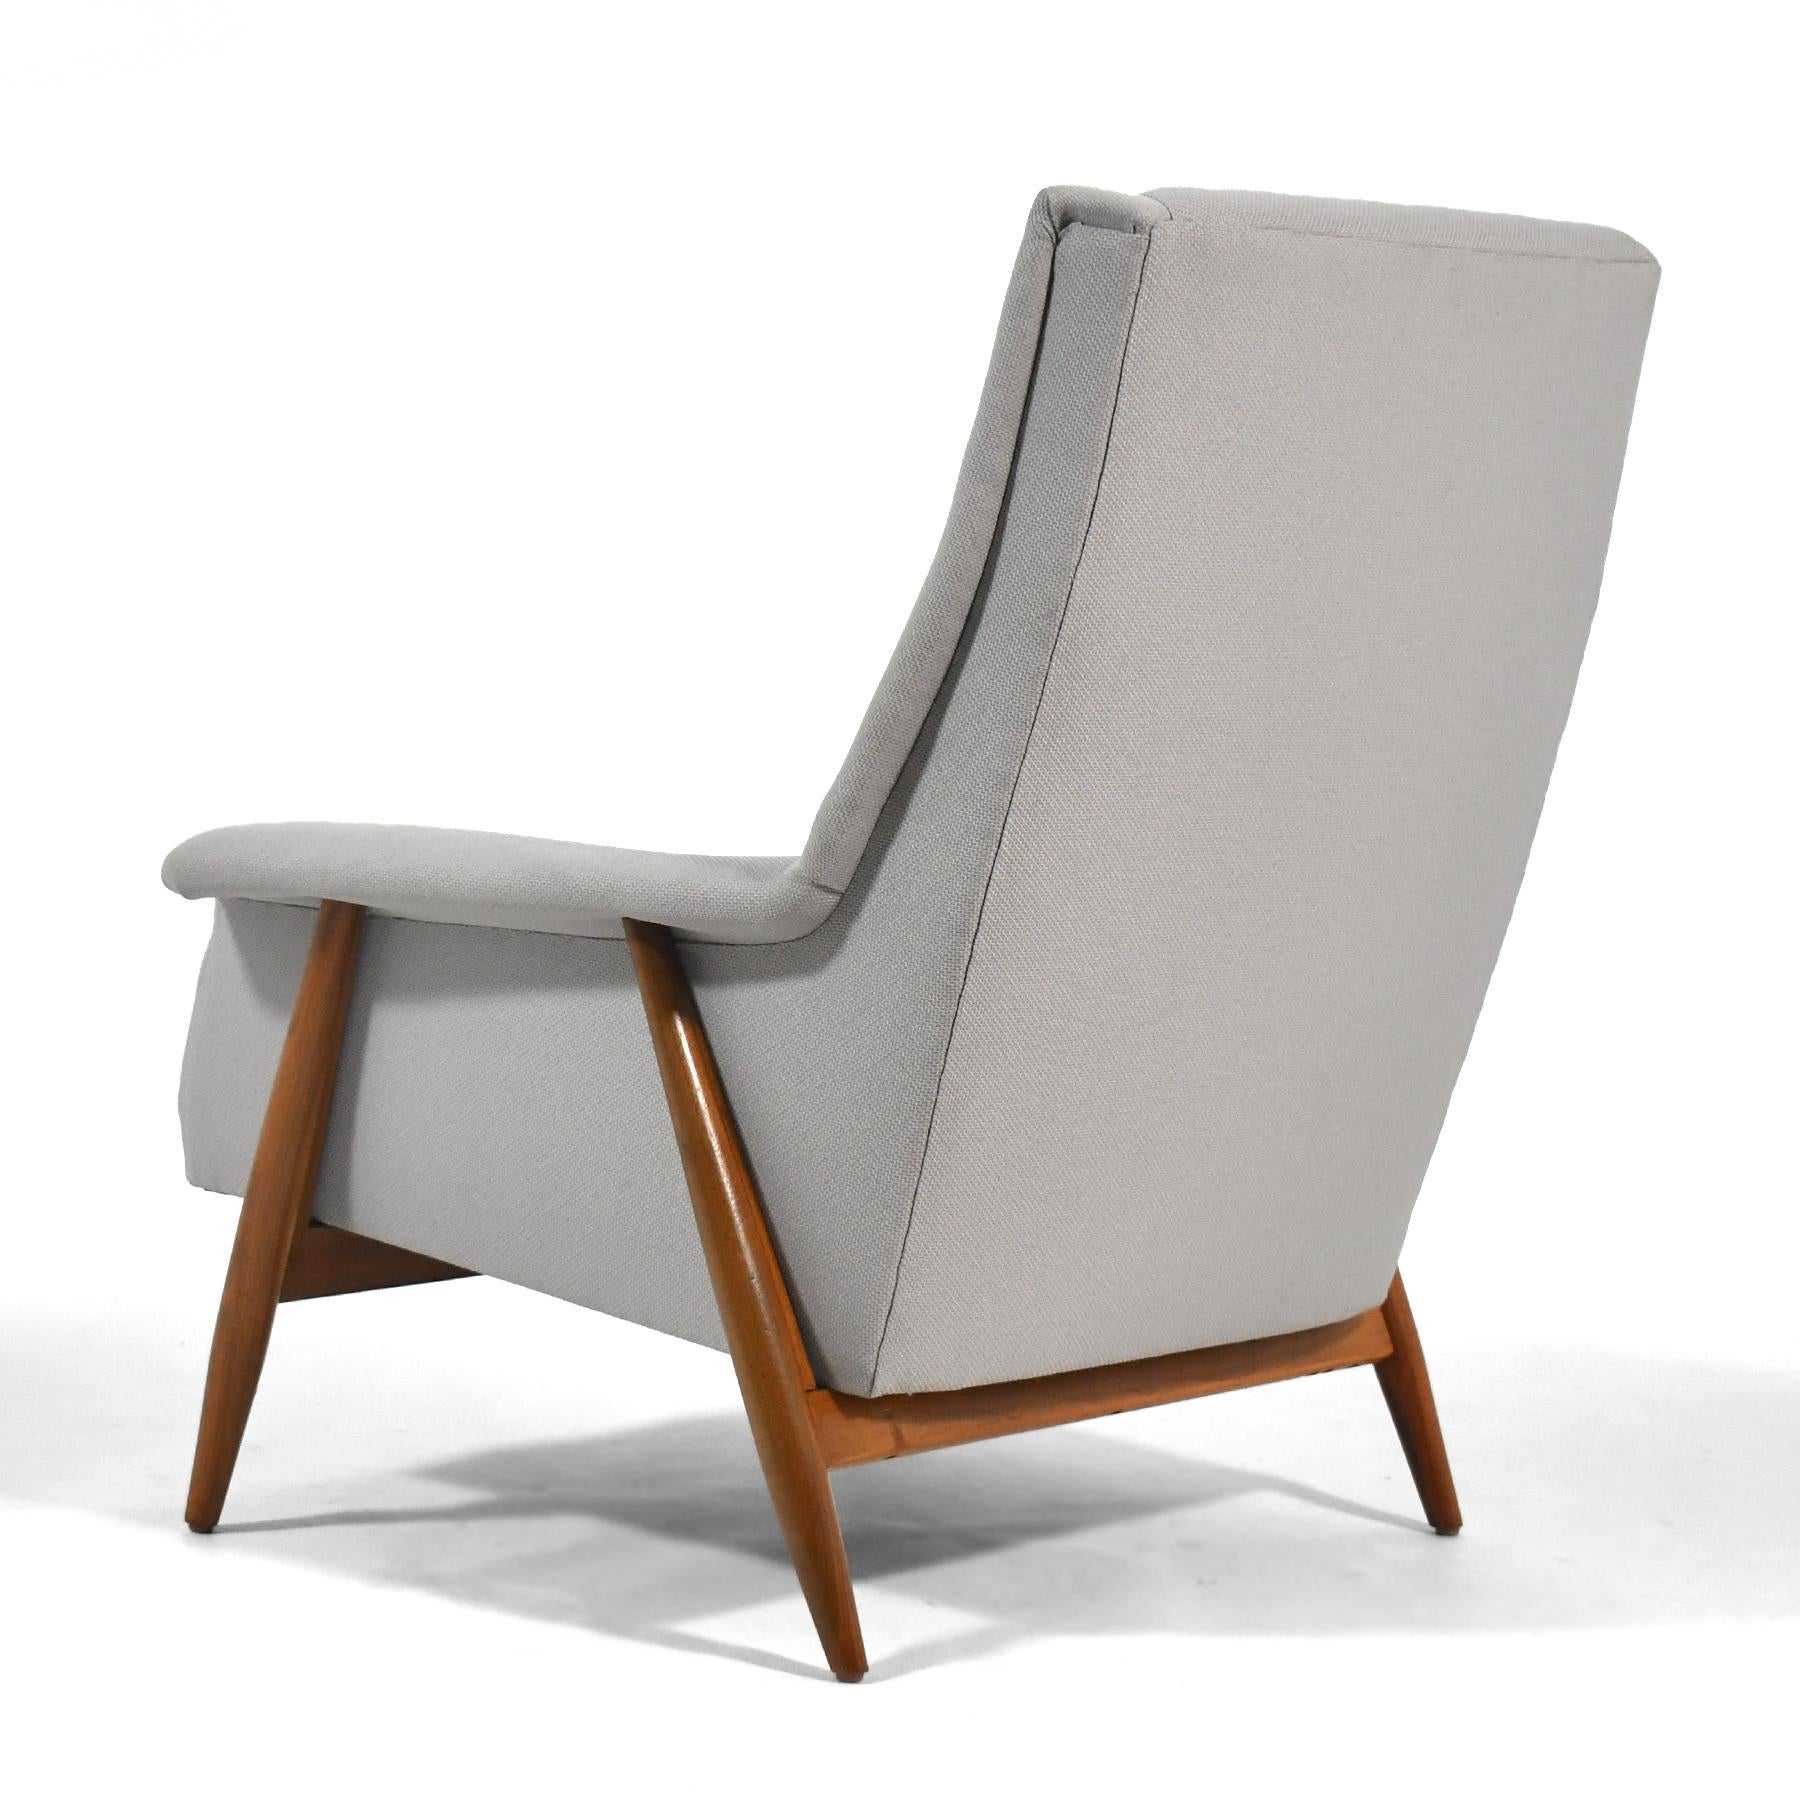 Mid-20th Century Milo Baughman Lounge Chair by Thayer Coggin For Sale